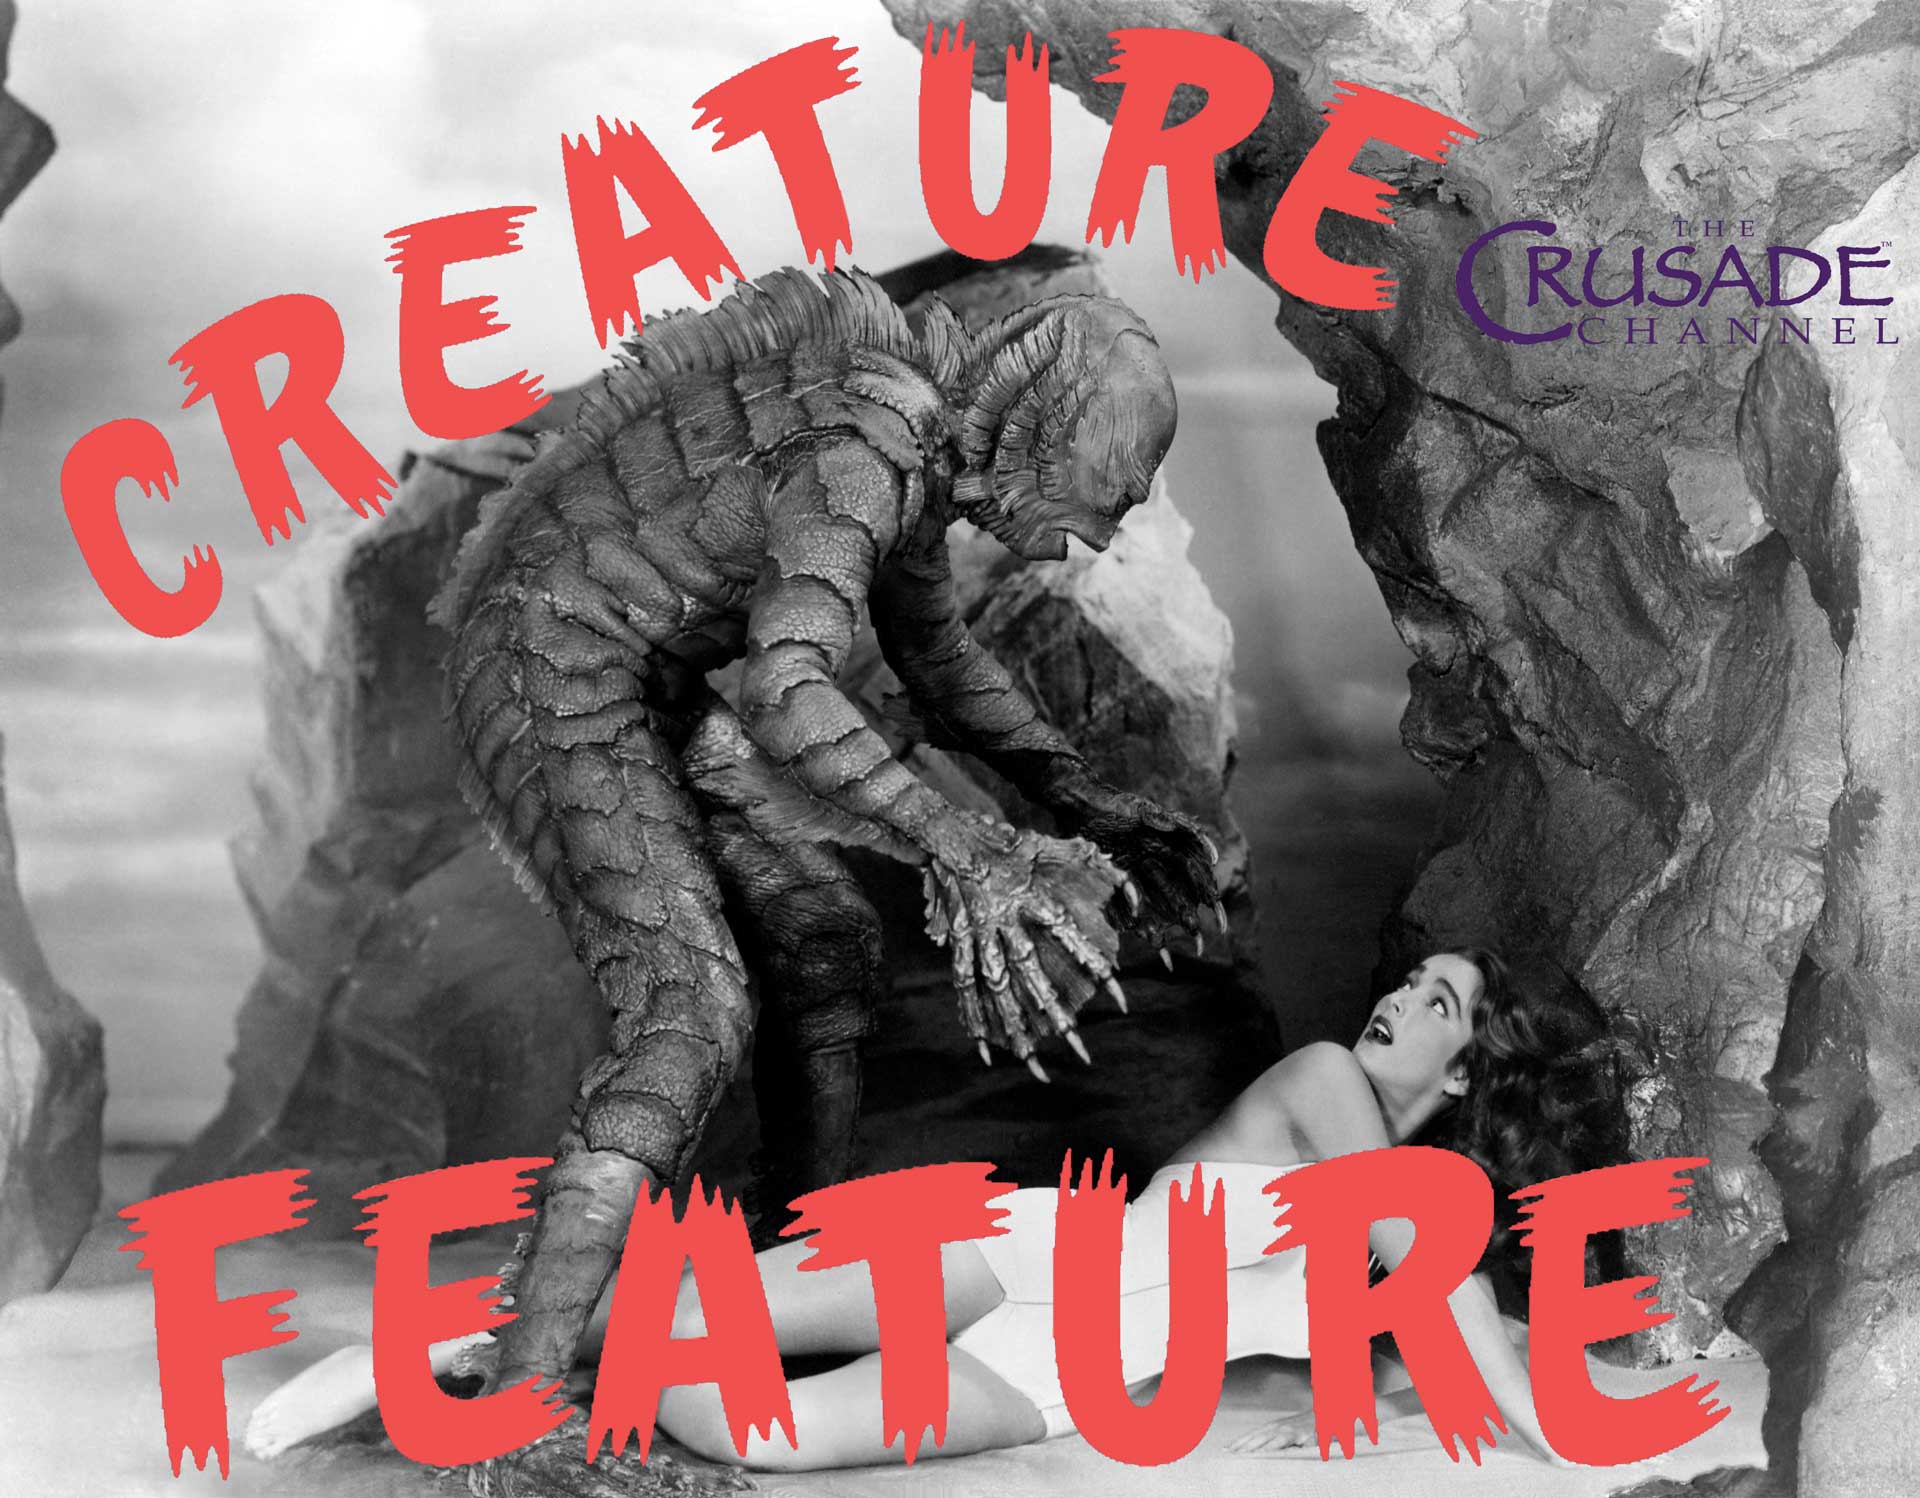 Friday Night Creature Features!